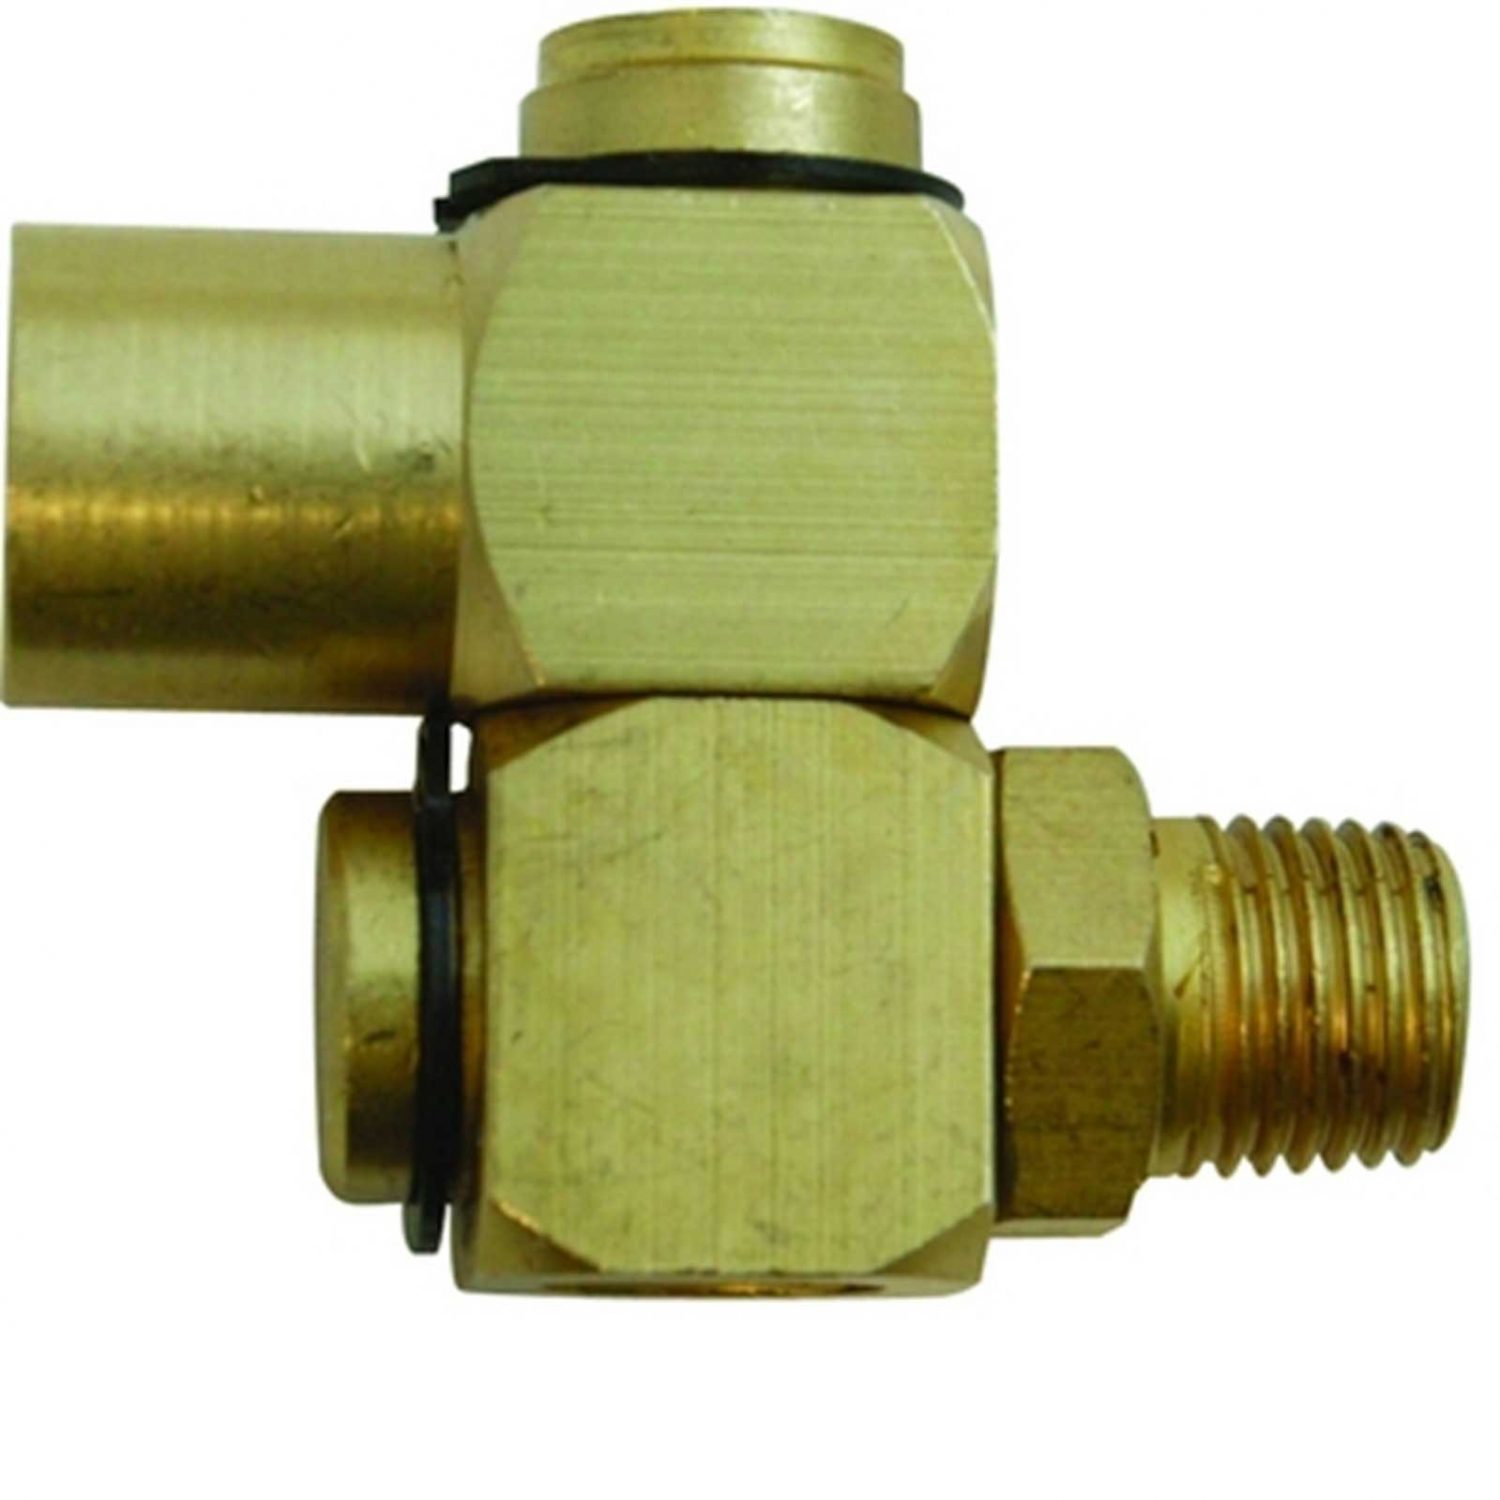 AIRLINE SWIVEL CONNECTOR – Rustbuster